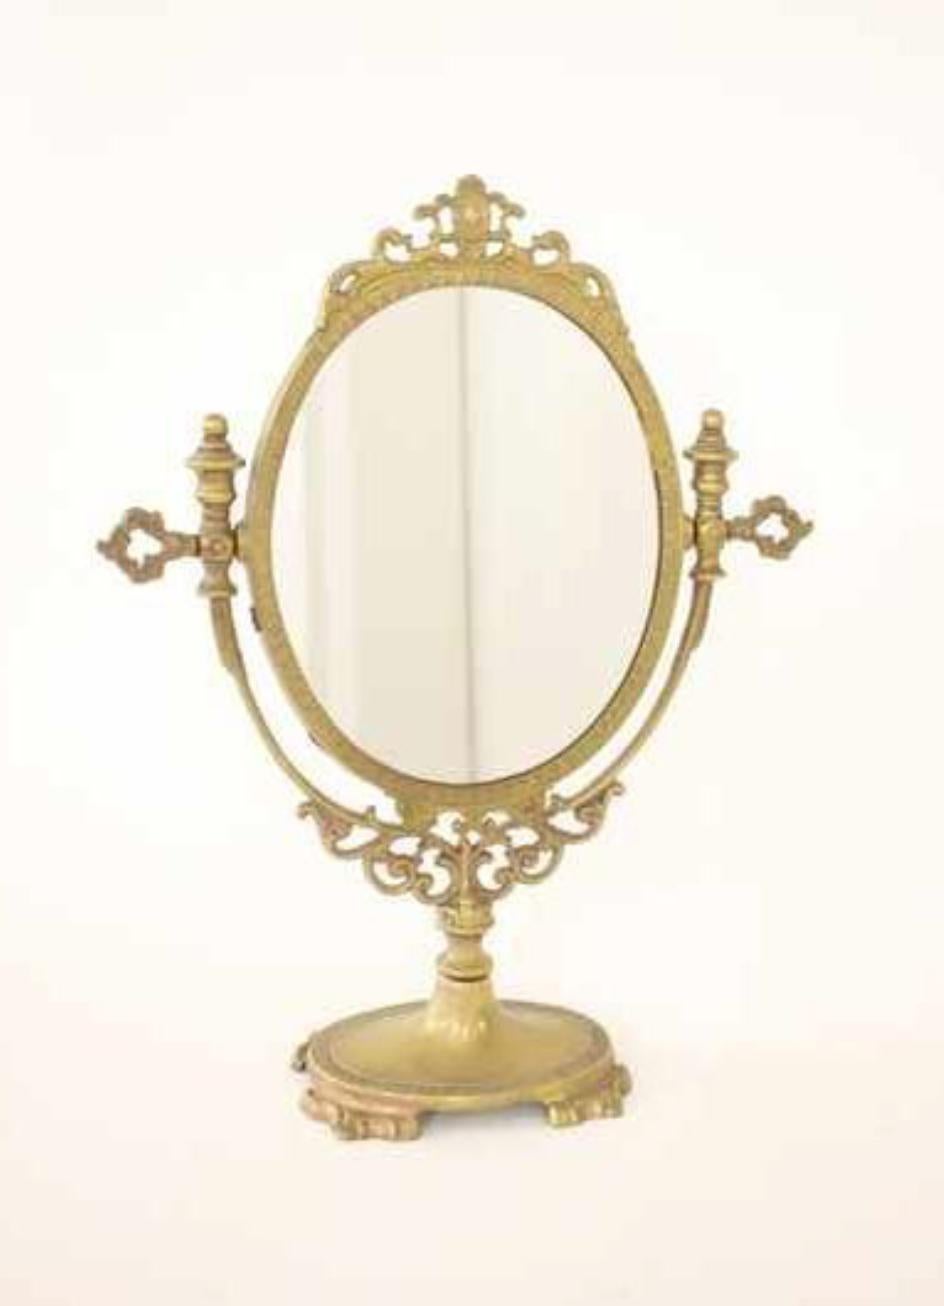 20th century gilded bronze table mirror decorated with palmettes, a graphs, sheets of water and foliage.
France, circa 1920.
   